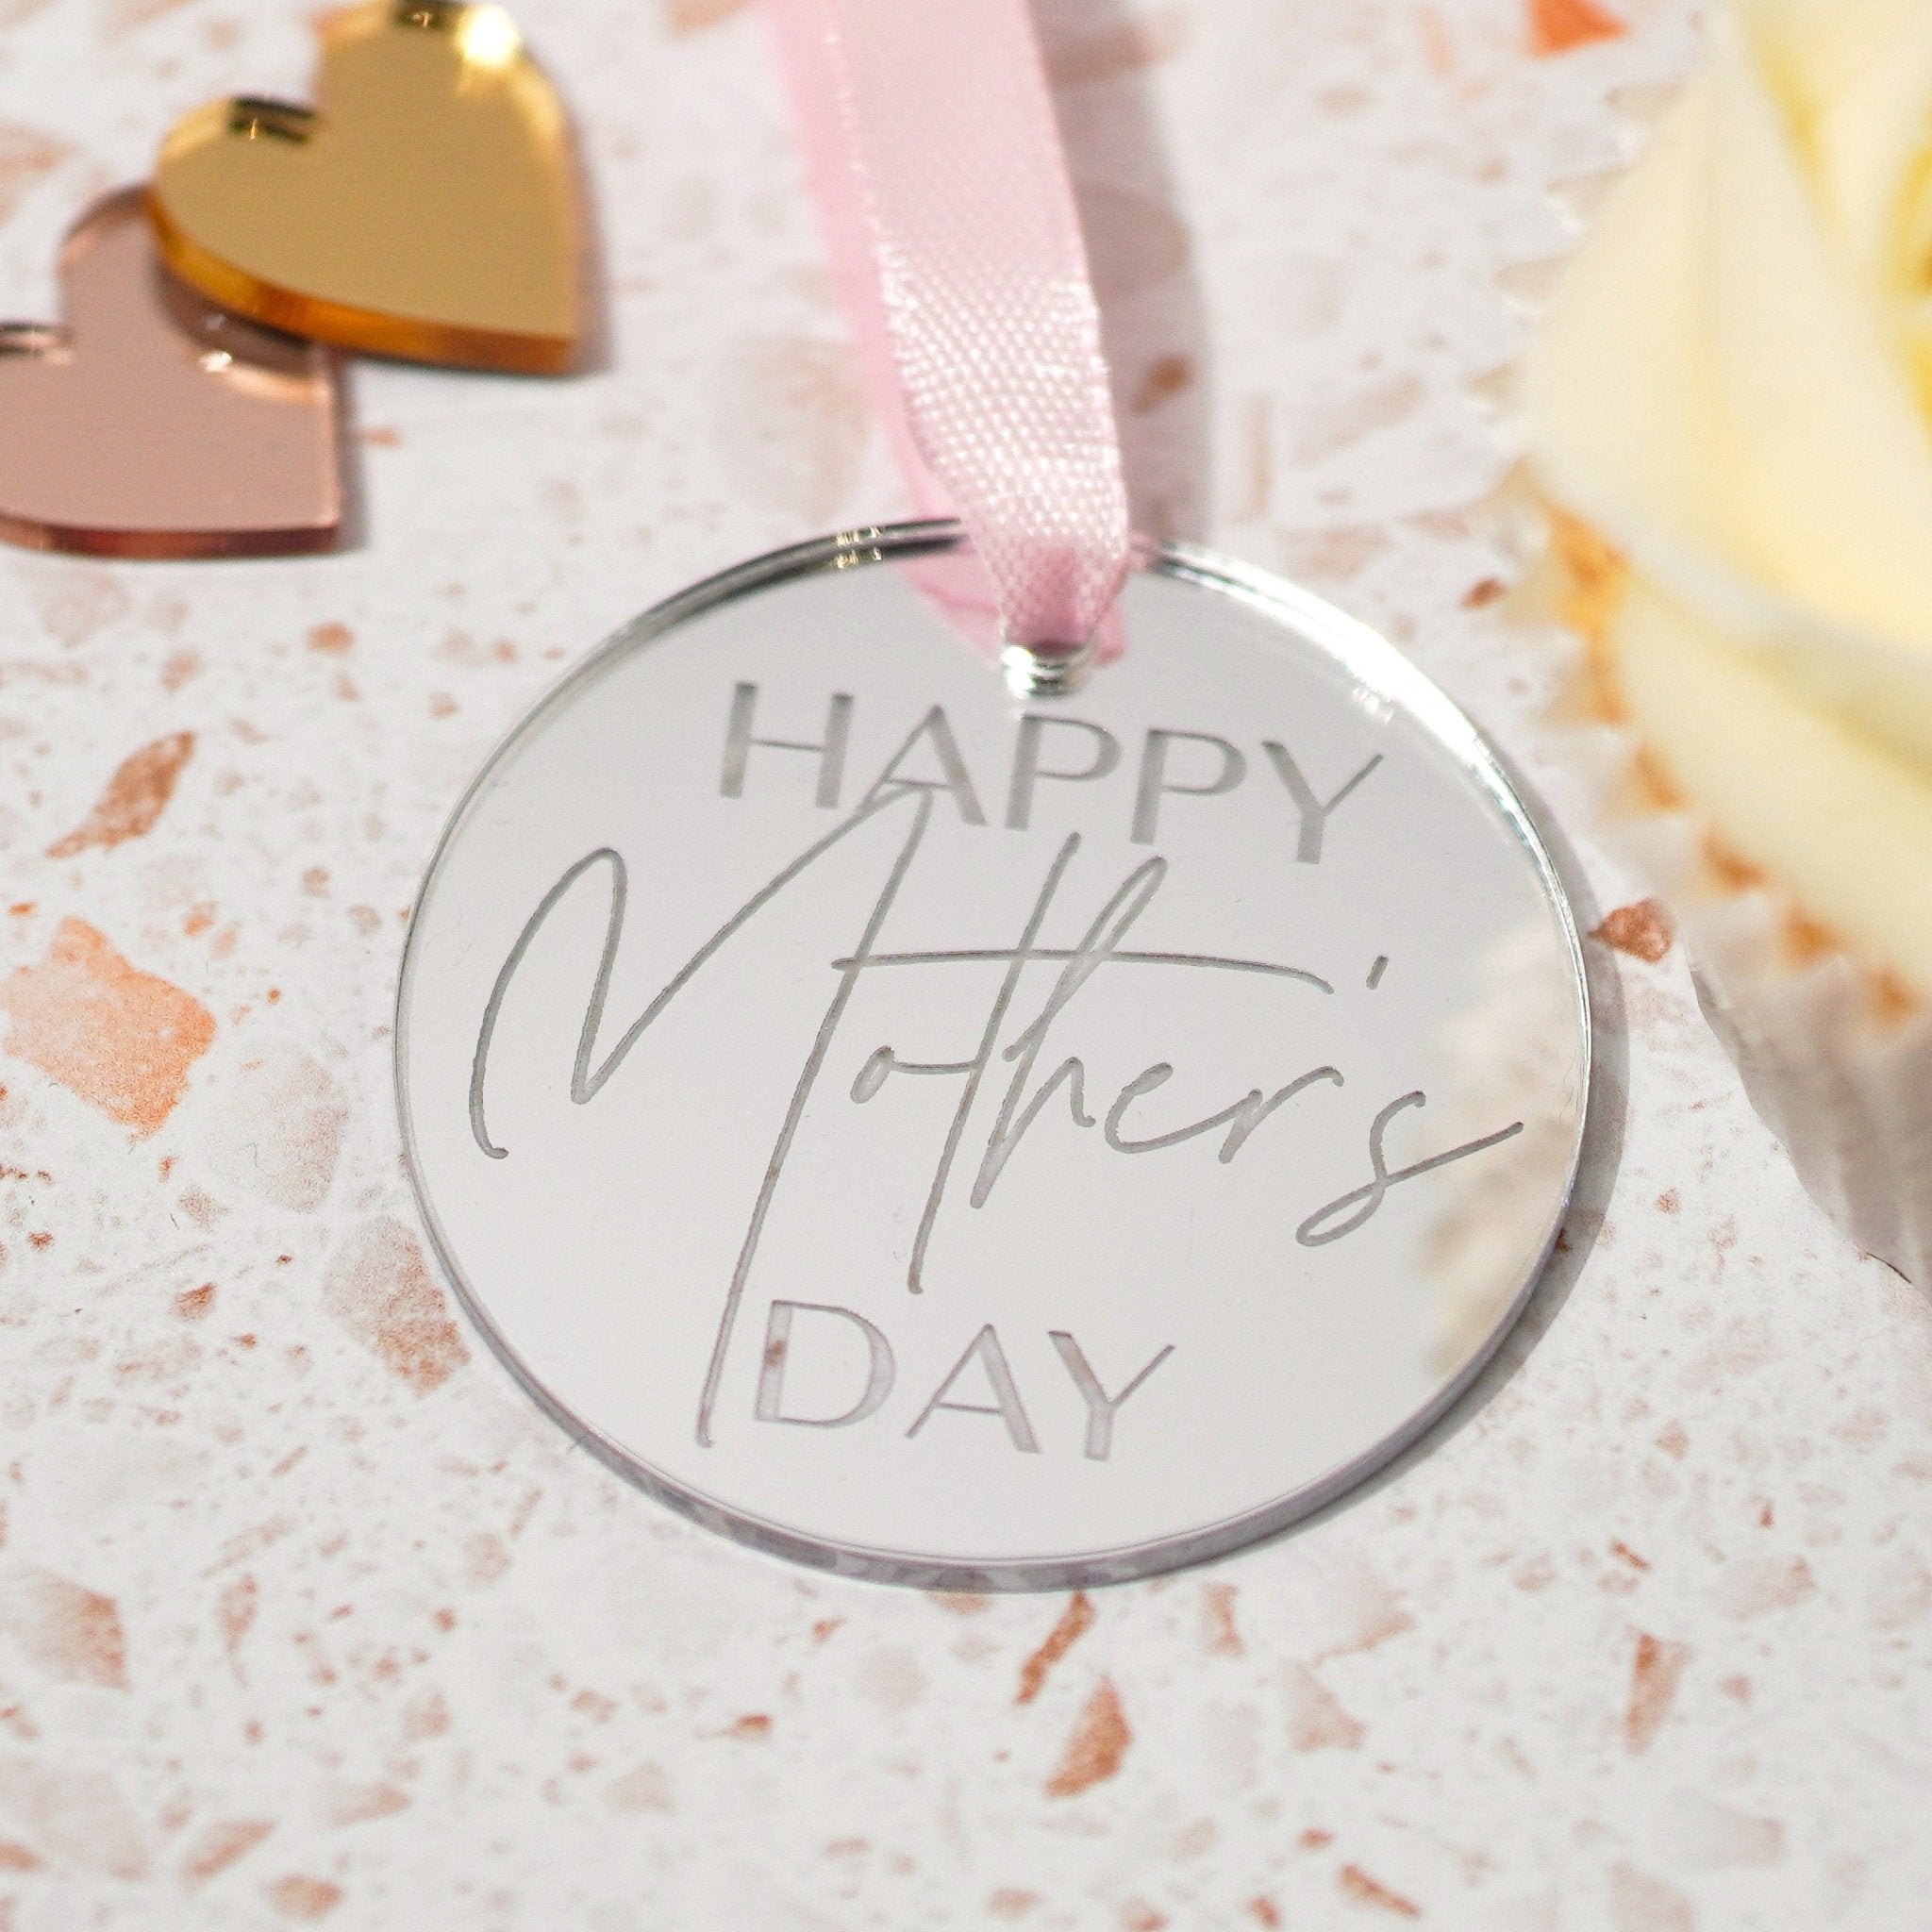 Happy Mothers Day gift tag